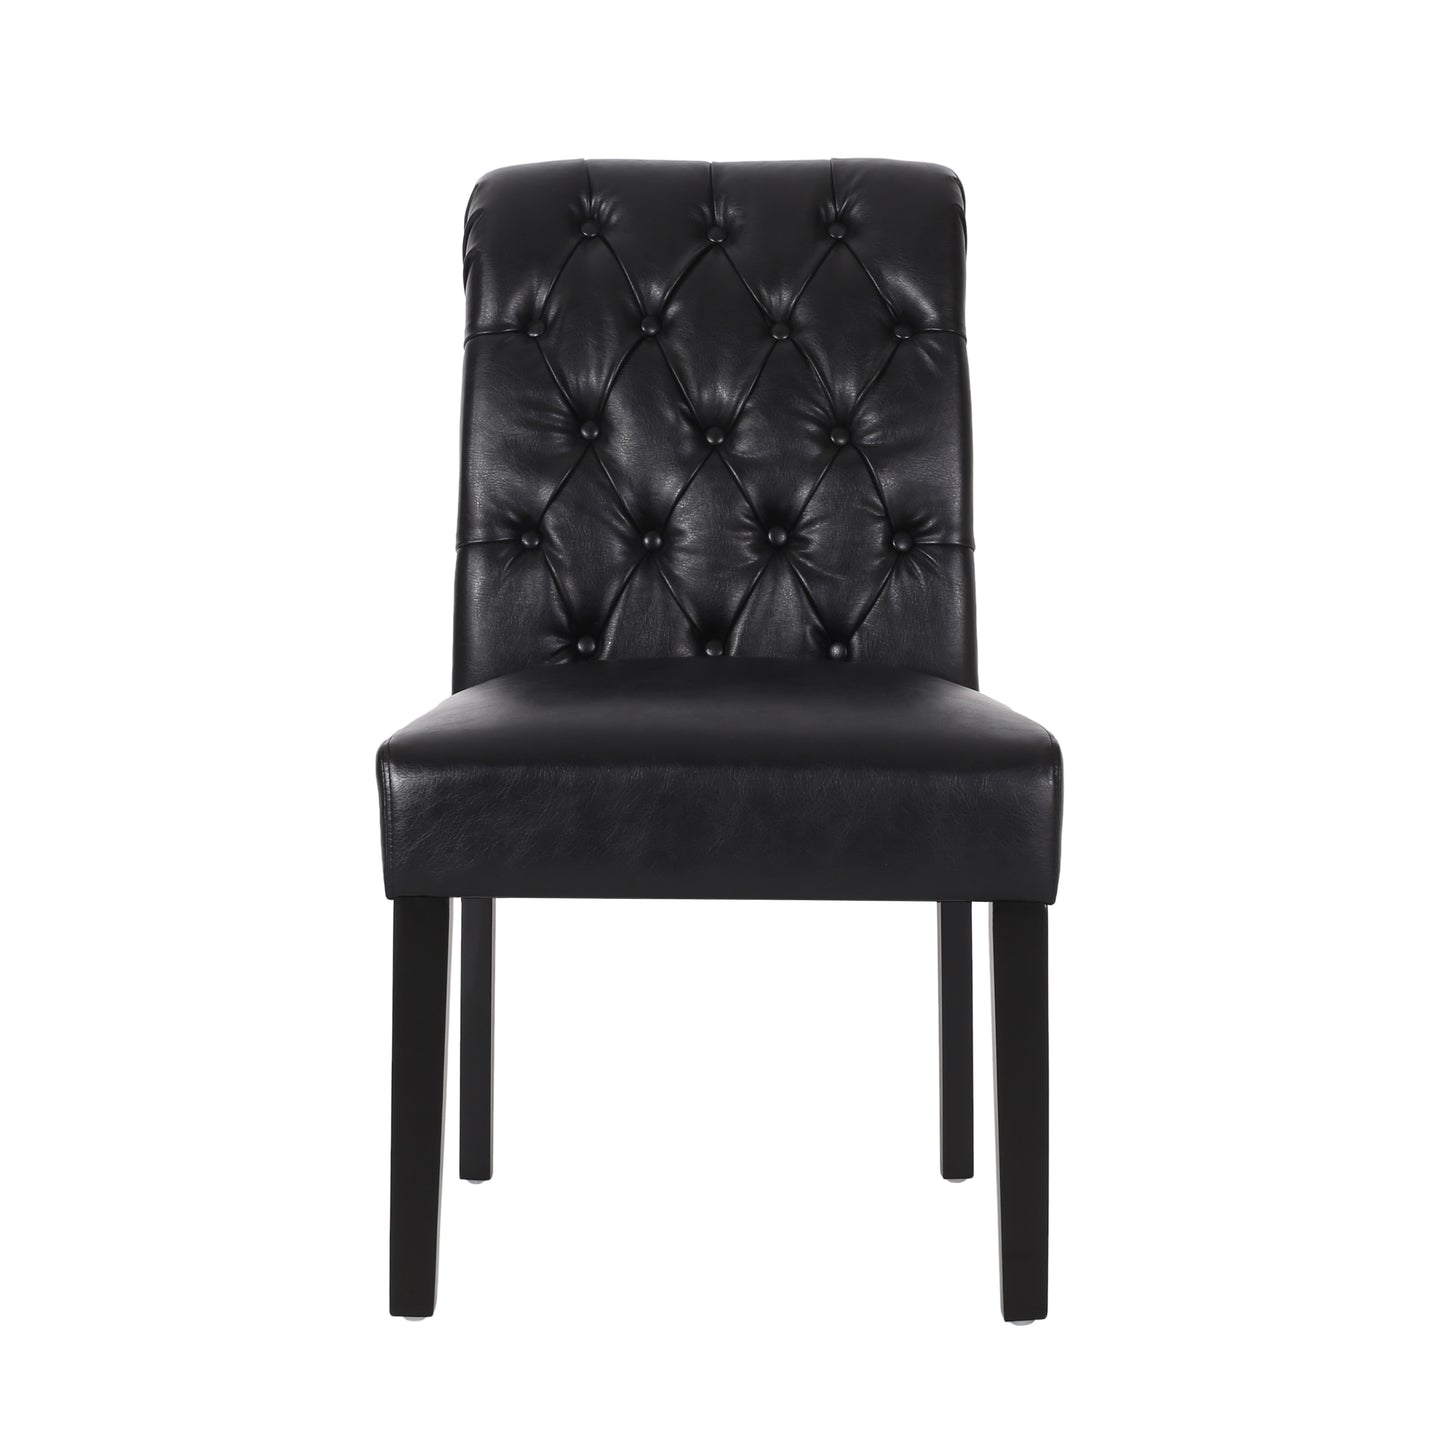 Emerson Contemporary Tufted Rolltop Dining Chairs, Set of 4